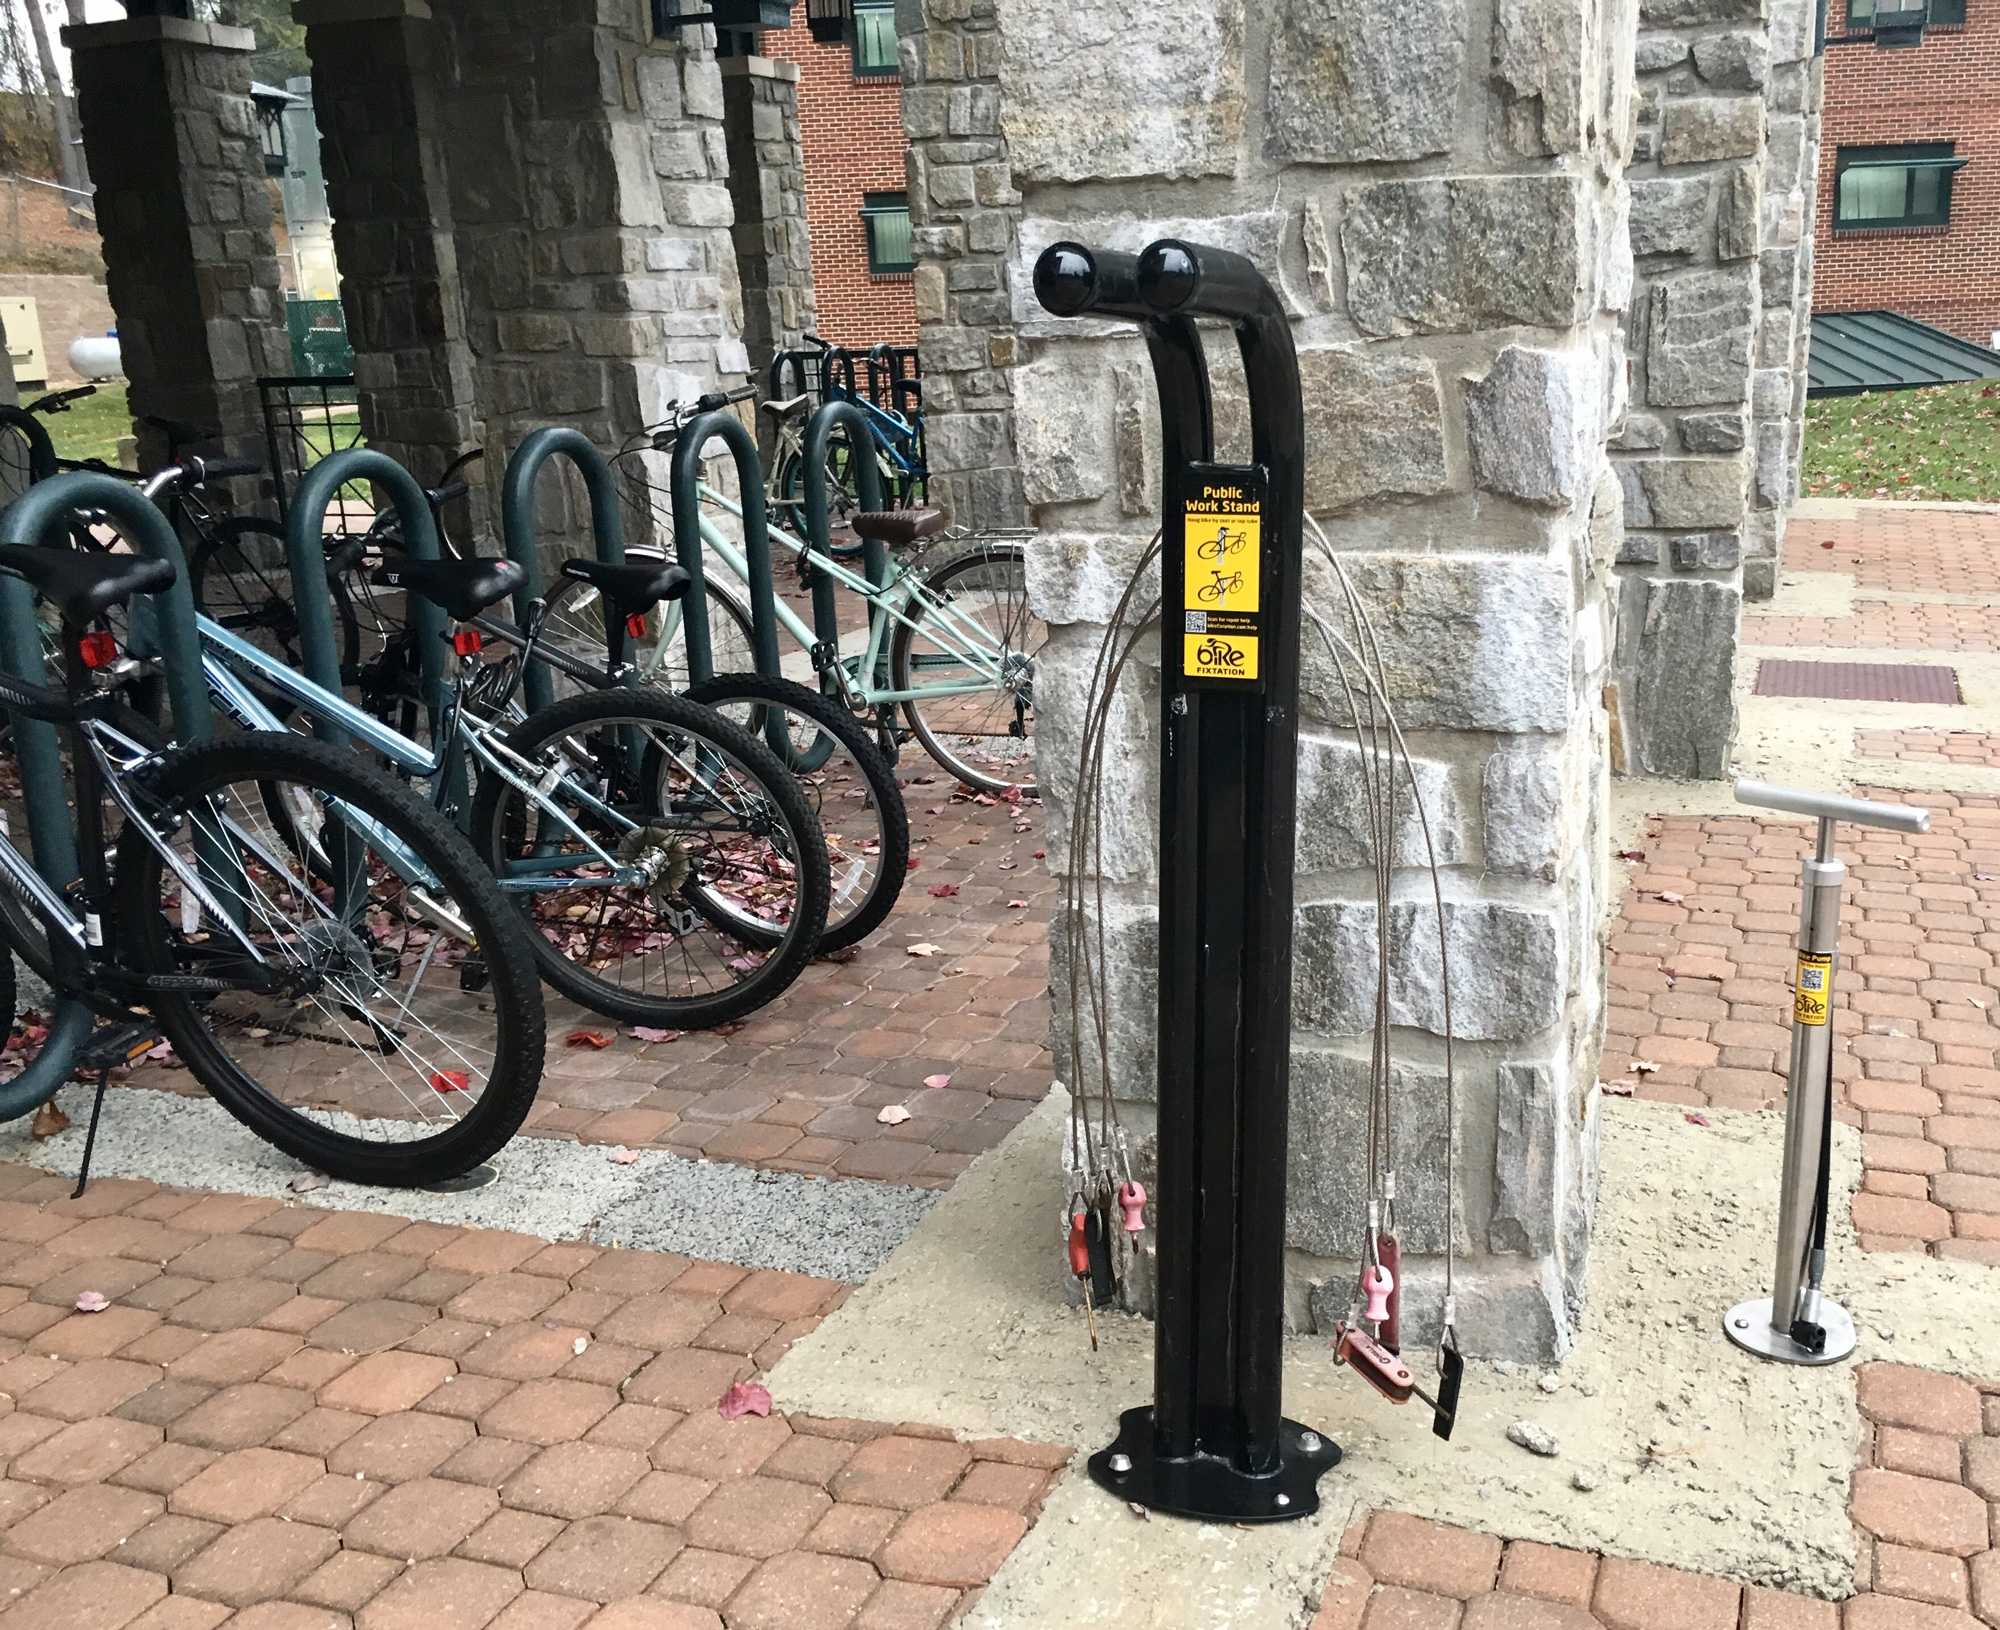 A+bike+work+station+set+up+outside+one+of+the+resident+halls+at+Appalachian+State.+The+Office+of+Substainabilitys+Alternative+Transportaion+Sub+Committee+worked+hard+to+set+up+many+bike+work+stations+around+campus.+The+locations+include%2C+Lovill+Hall%2C+Frank+Hall%2C+Sanford+Mall%2C+Holmes+Convocation+Center%2C+Walker+Hall%2C+Peacock+Hall%2C+and+Katherine+Harper+Hall.